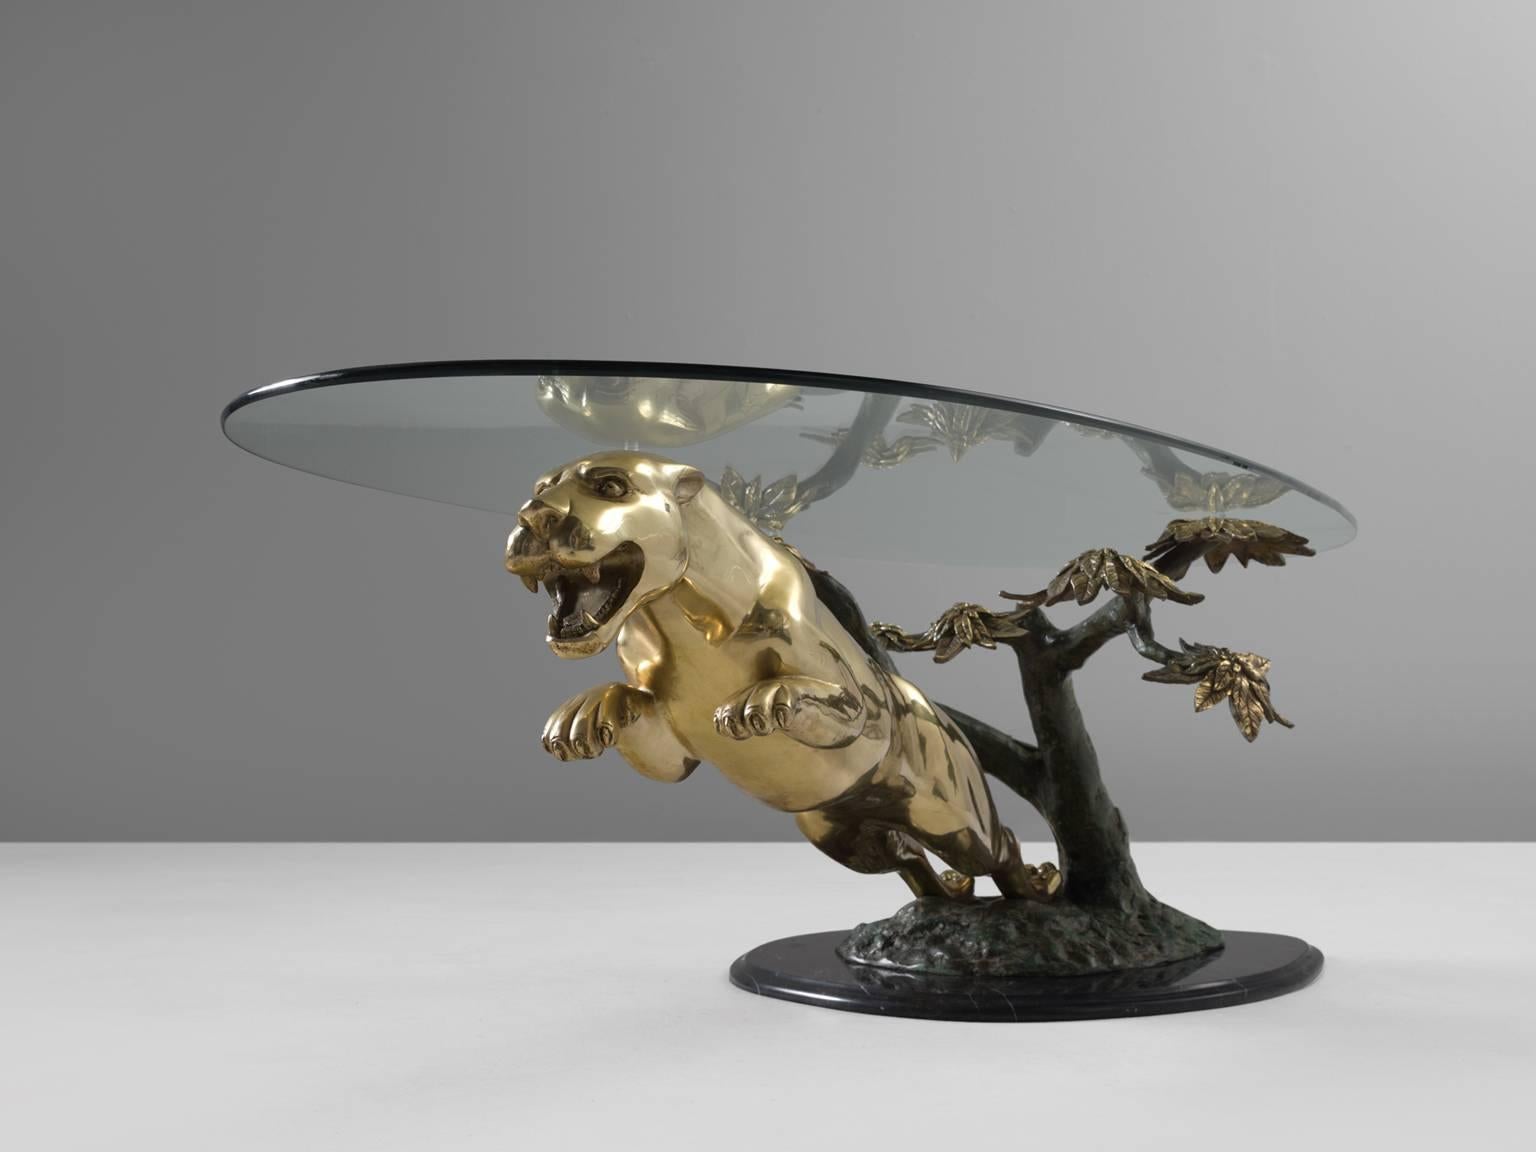 Coffee table, bronze, brass marble and glass, 1970s, France

This sculptural cocktail or coffee table is truly unique. The jaguar is executed perfectly and almost seems to leap away from the table. The base is made from Nero Marquina marble and